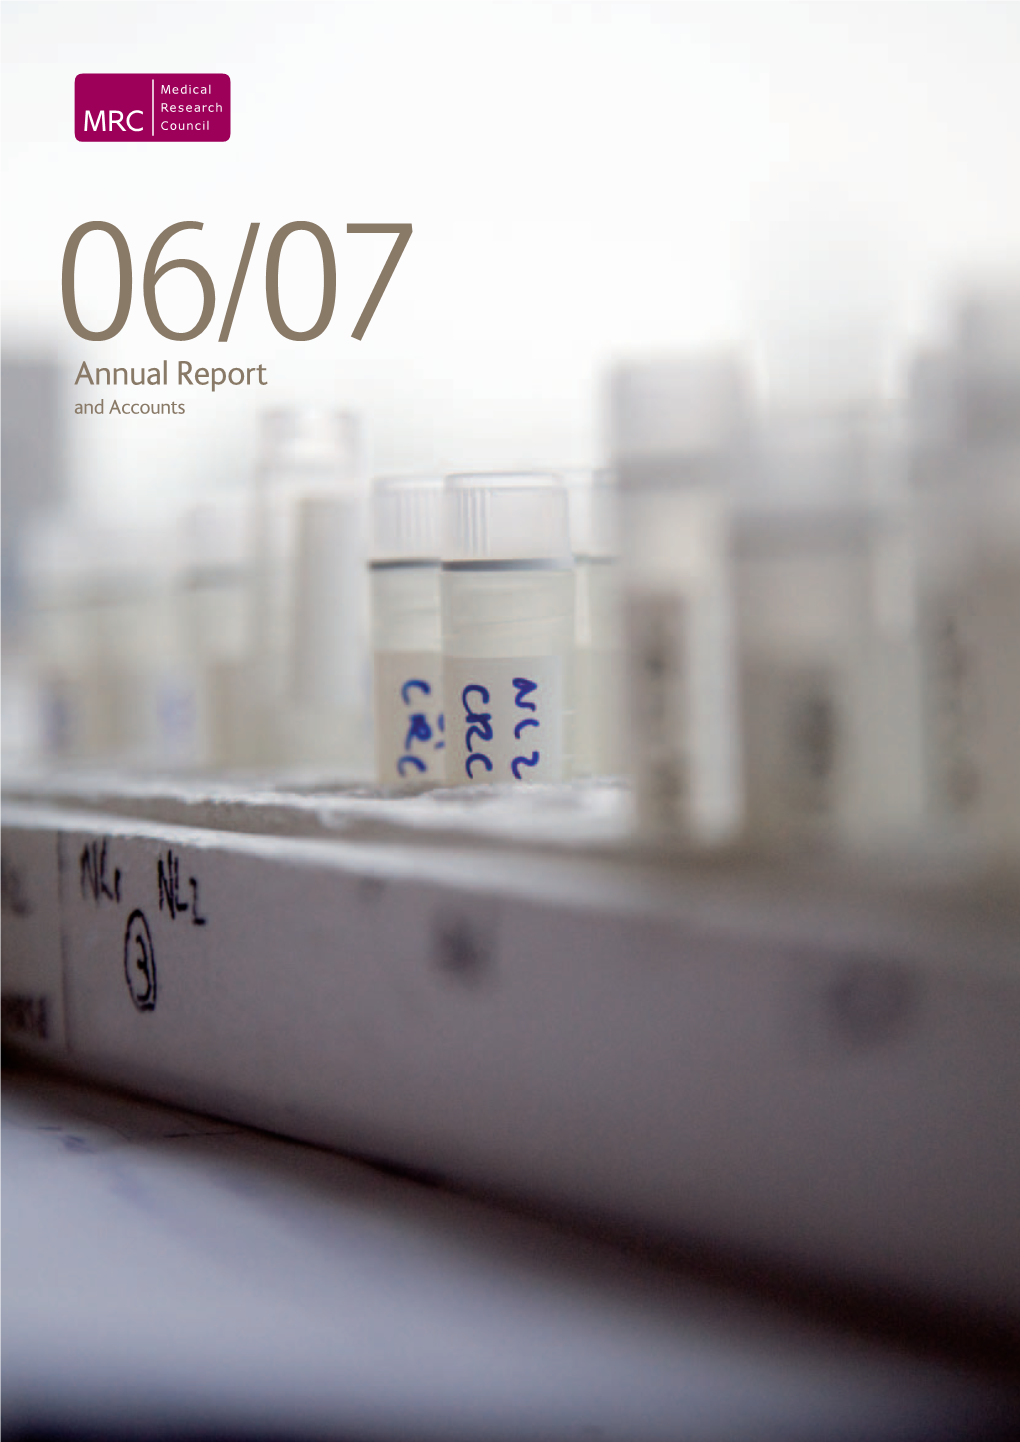 Annual Report and Accounts 2006/07